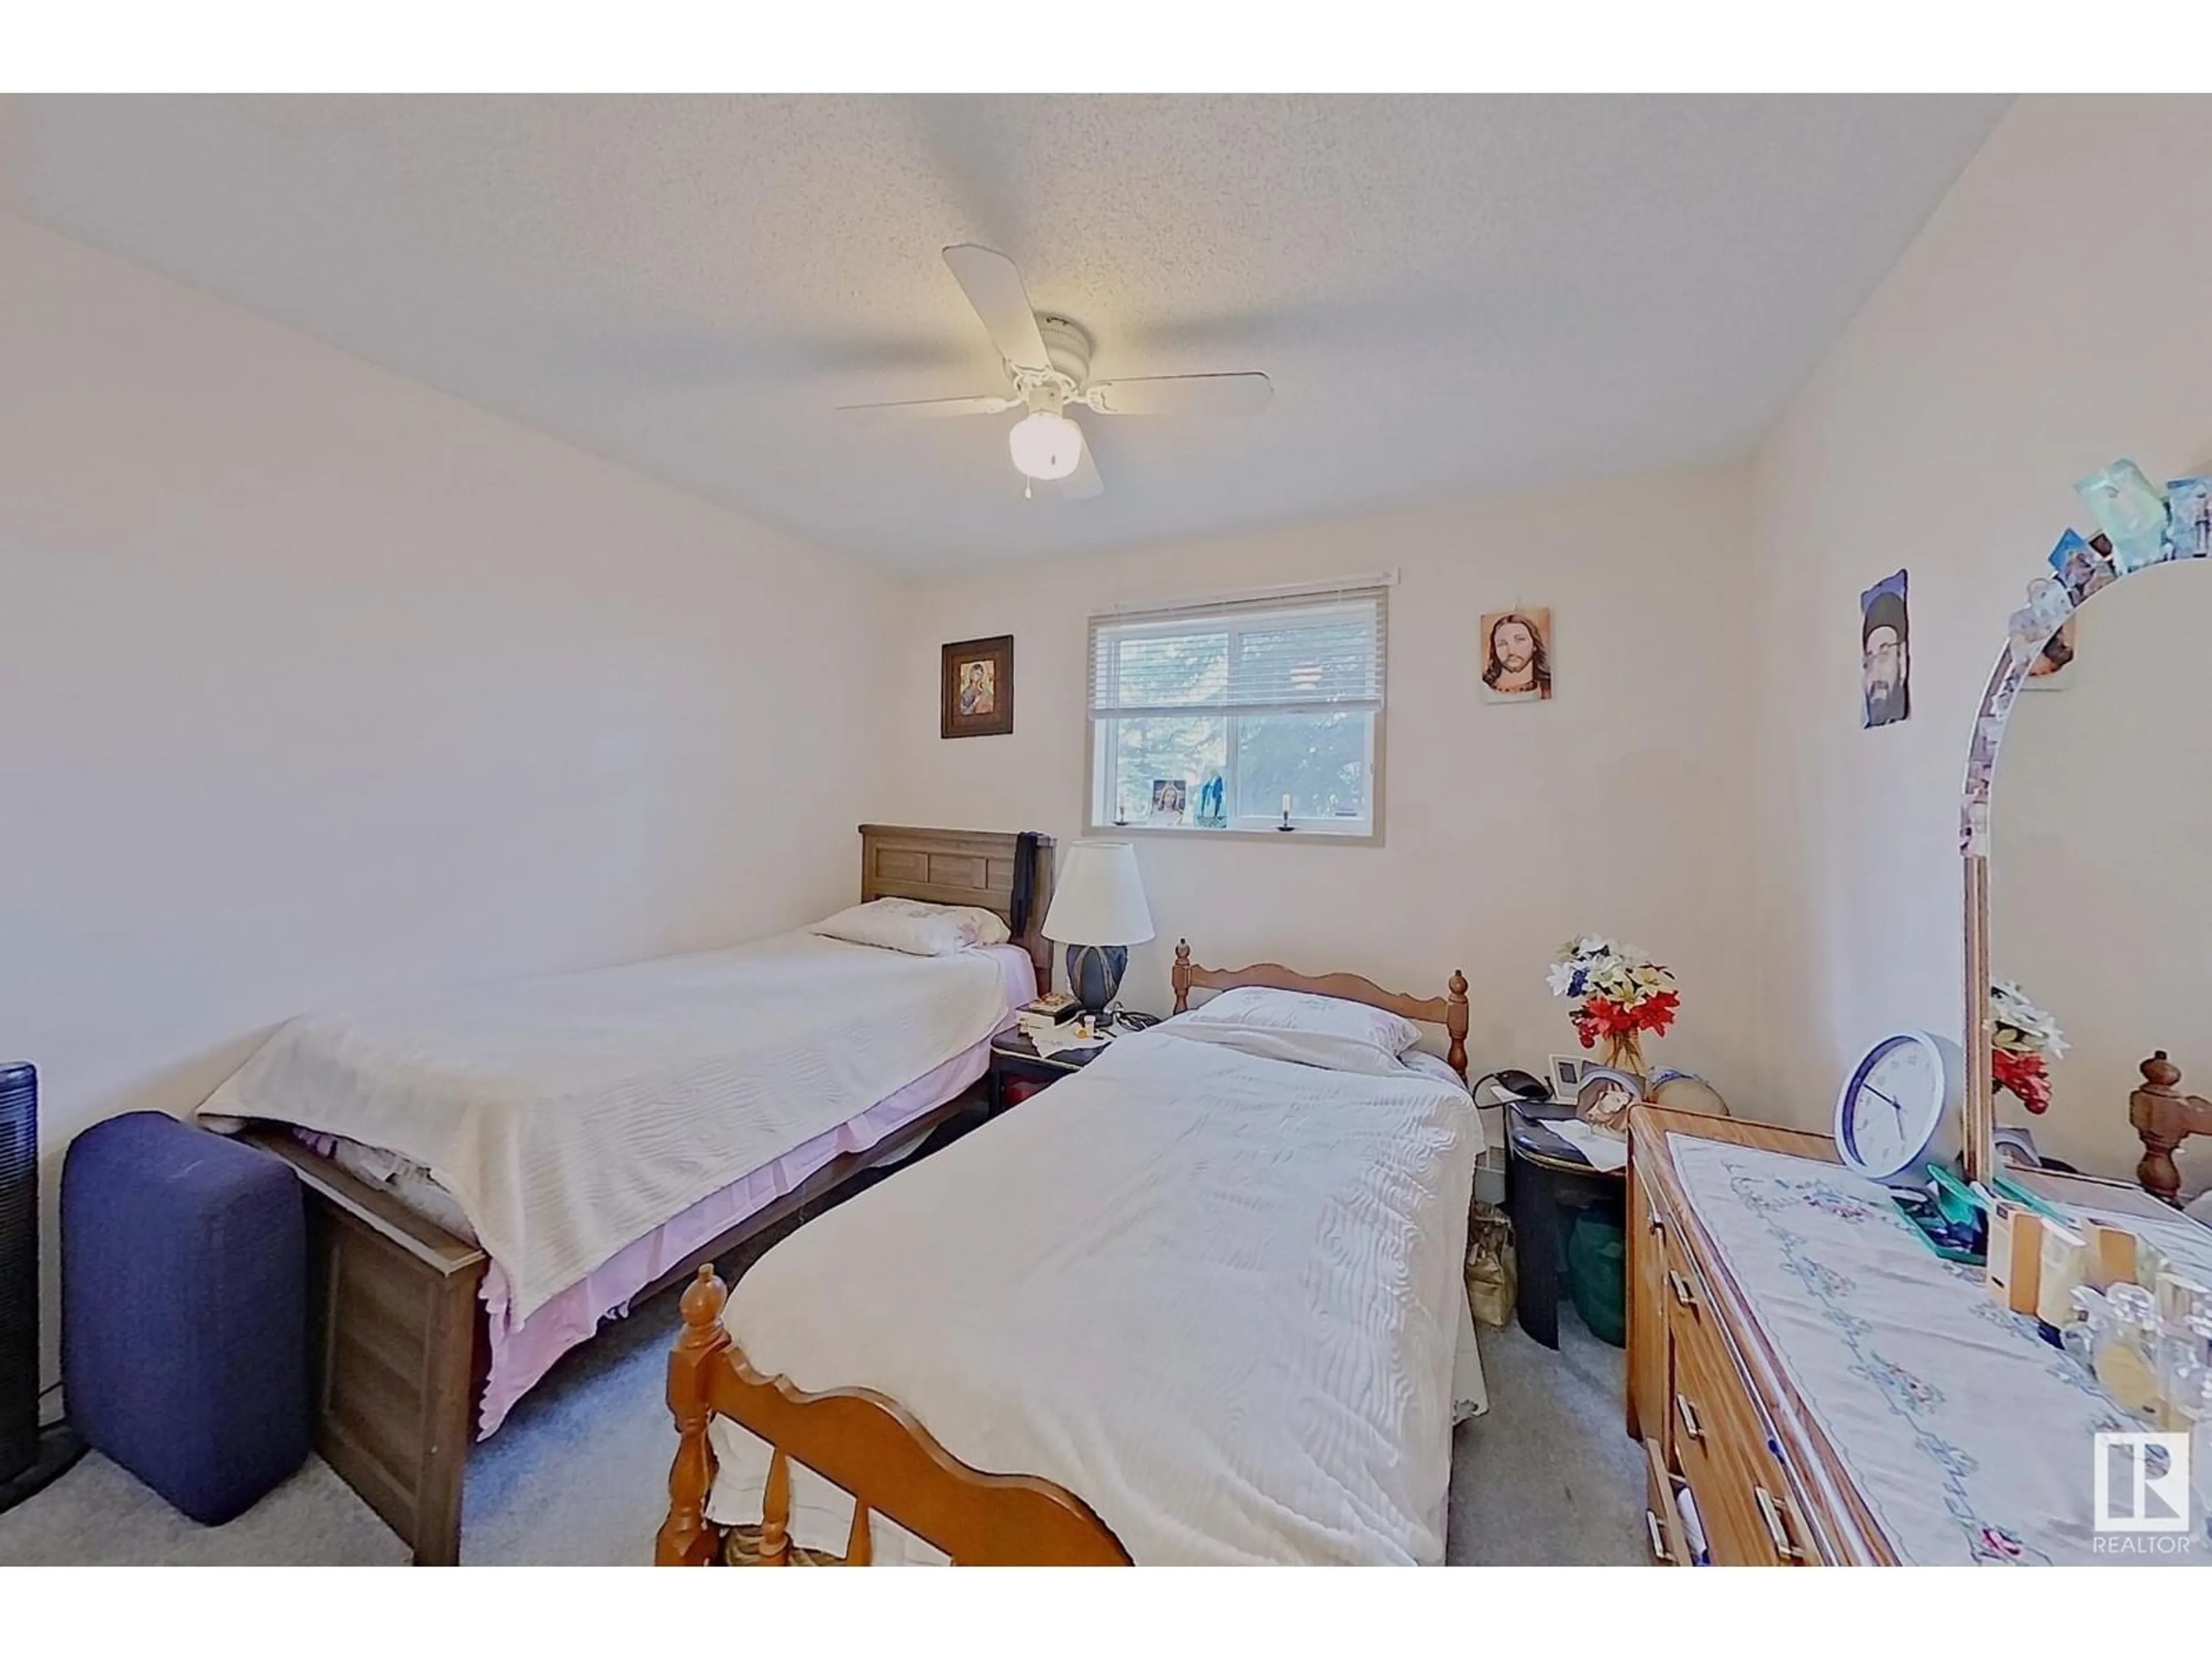 A pic of a room for #107 2508 50 St NW, Edmonton Alberta T6L6X9